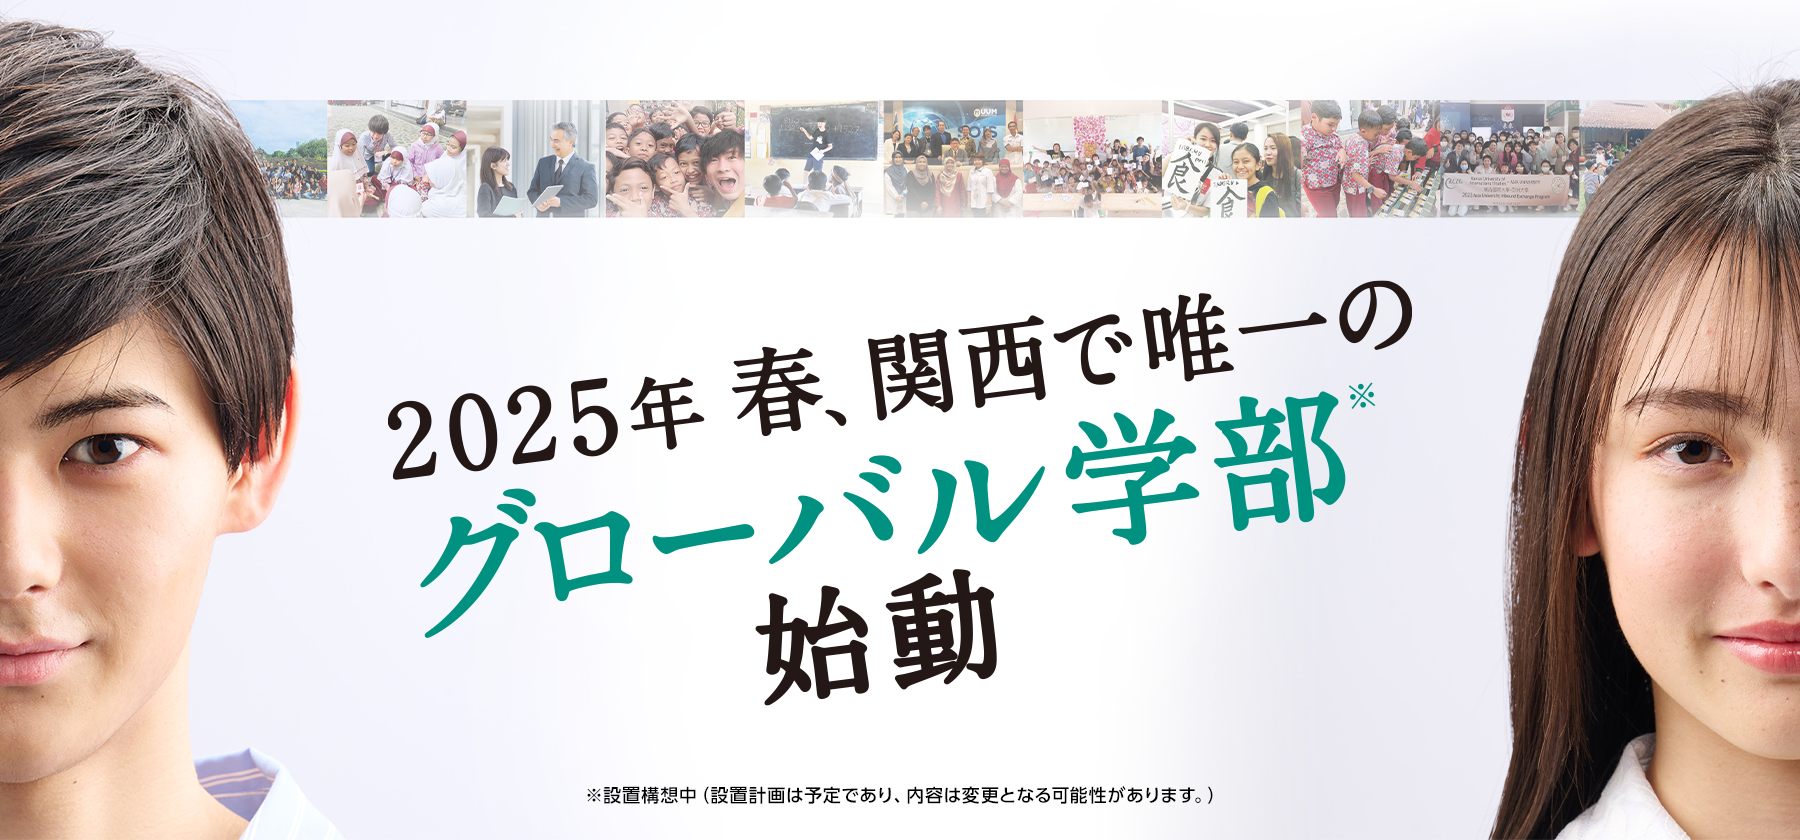 The only global faculty in Kansai will start in spring 2025